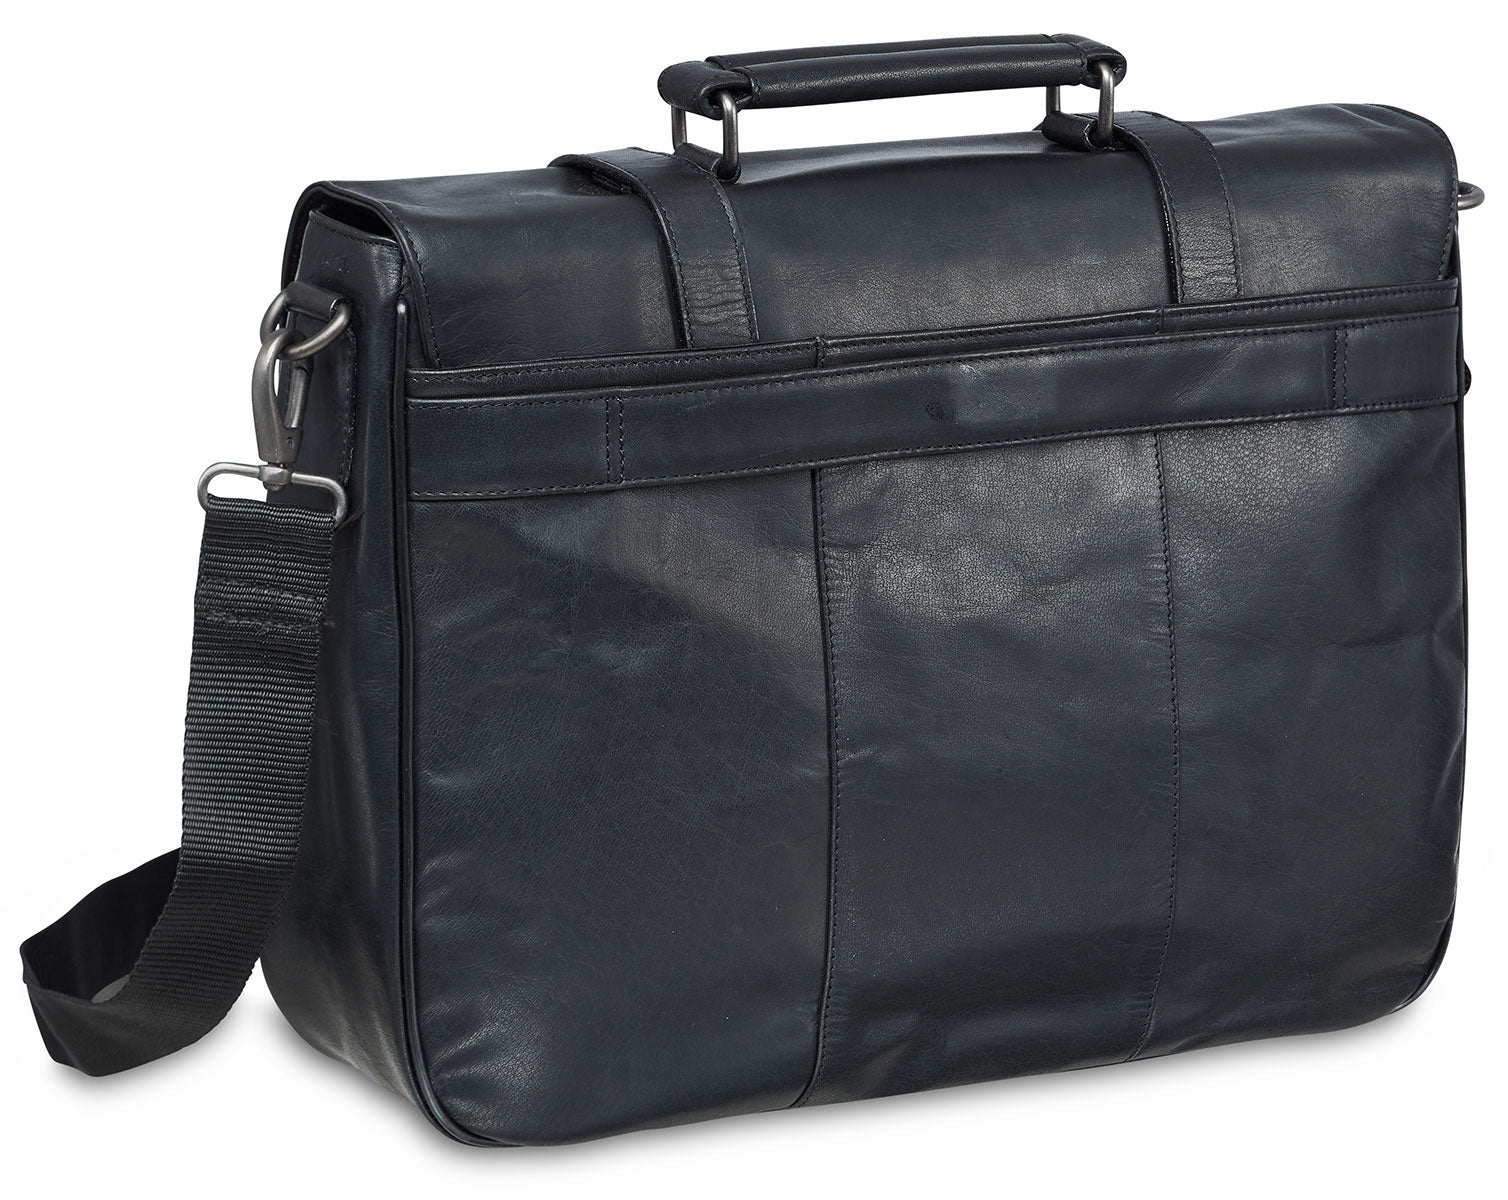 Single Compartment Briefcase for 15" Laptop with RFID Secure Pocket, 15.25" x 4" x 11.5", Black